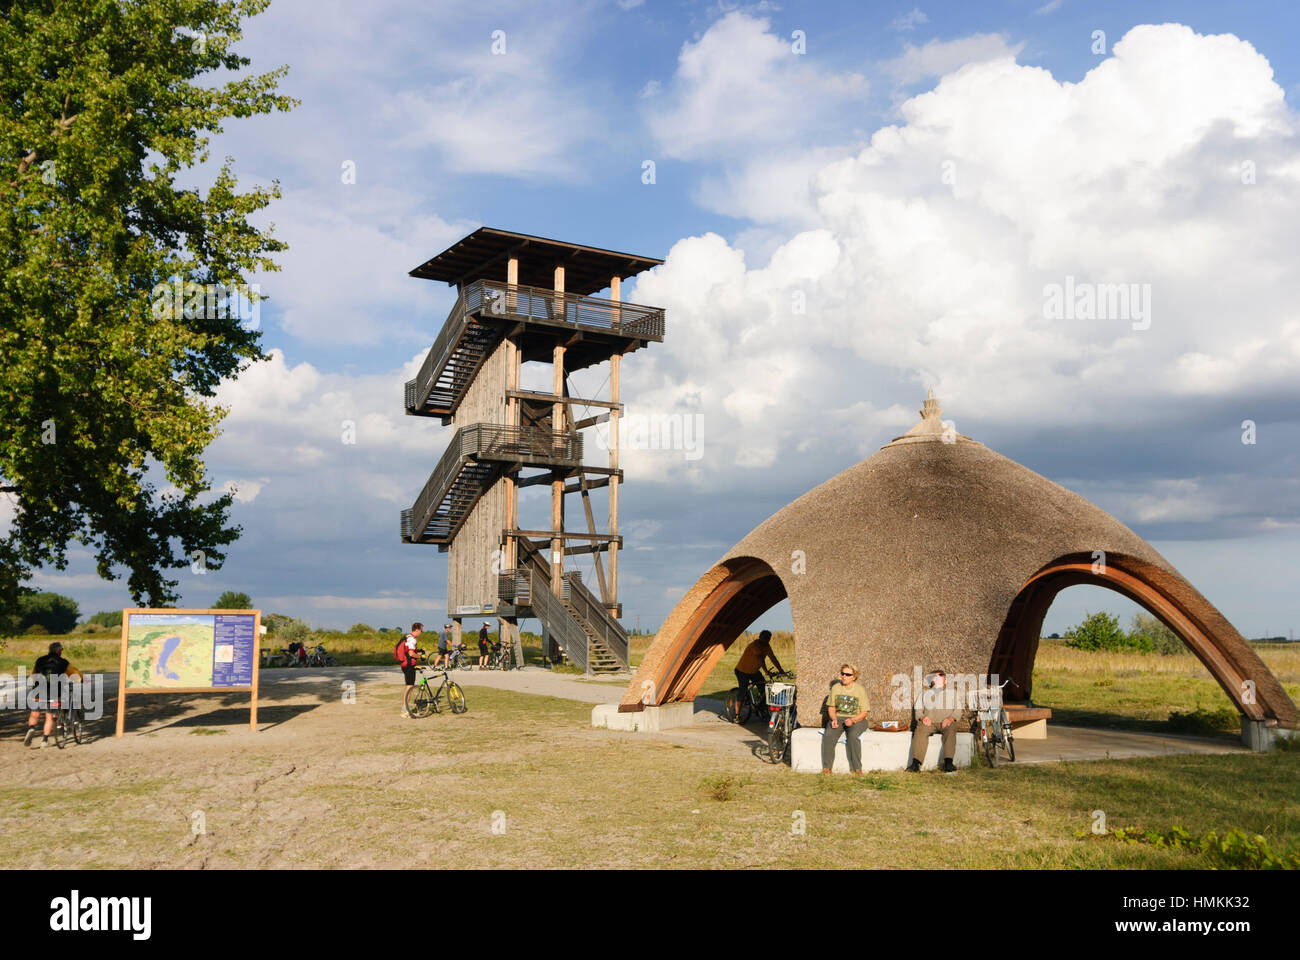 Illmitz: Lookout tower and thatched weather protection lodge - National Park Neusiedler See - Seewinkel, Neusiedler See (Lake Neusiedl), Burgenland, A Stock Photo